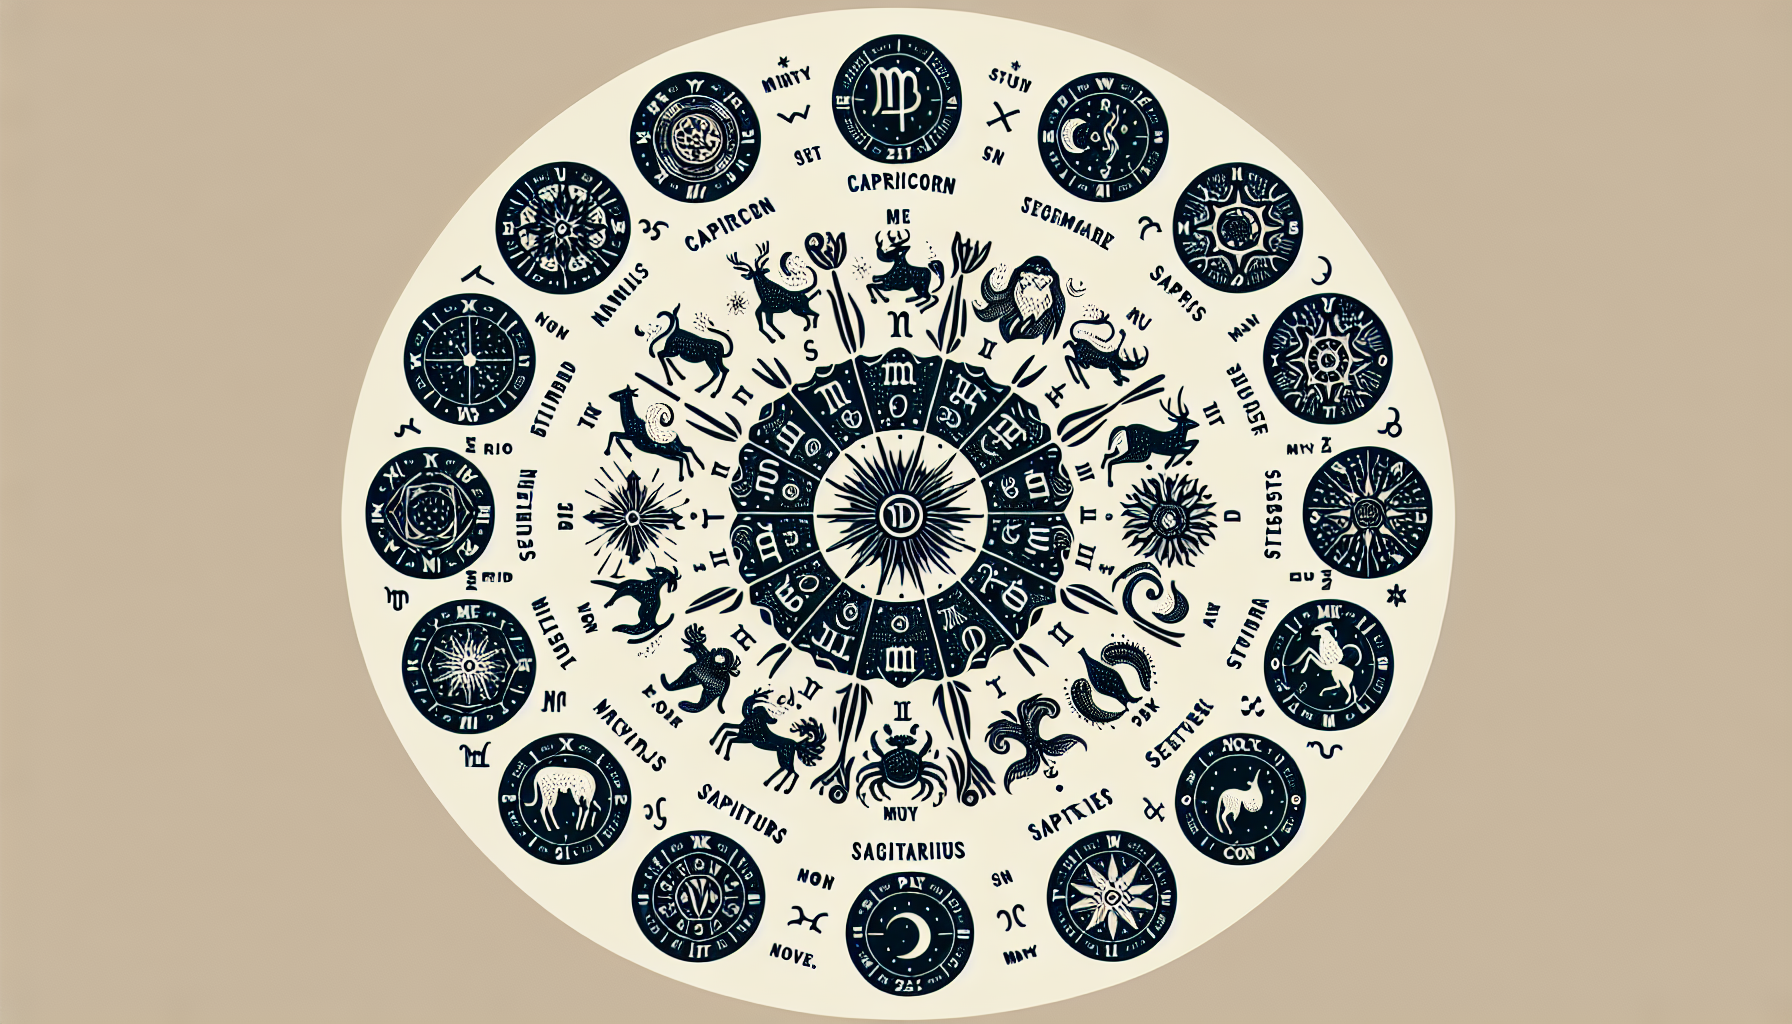 What Are The 12 Zodiac Signs In Order By Month?